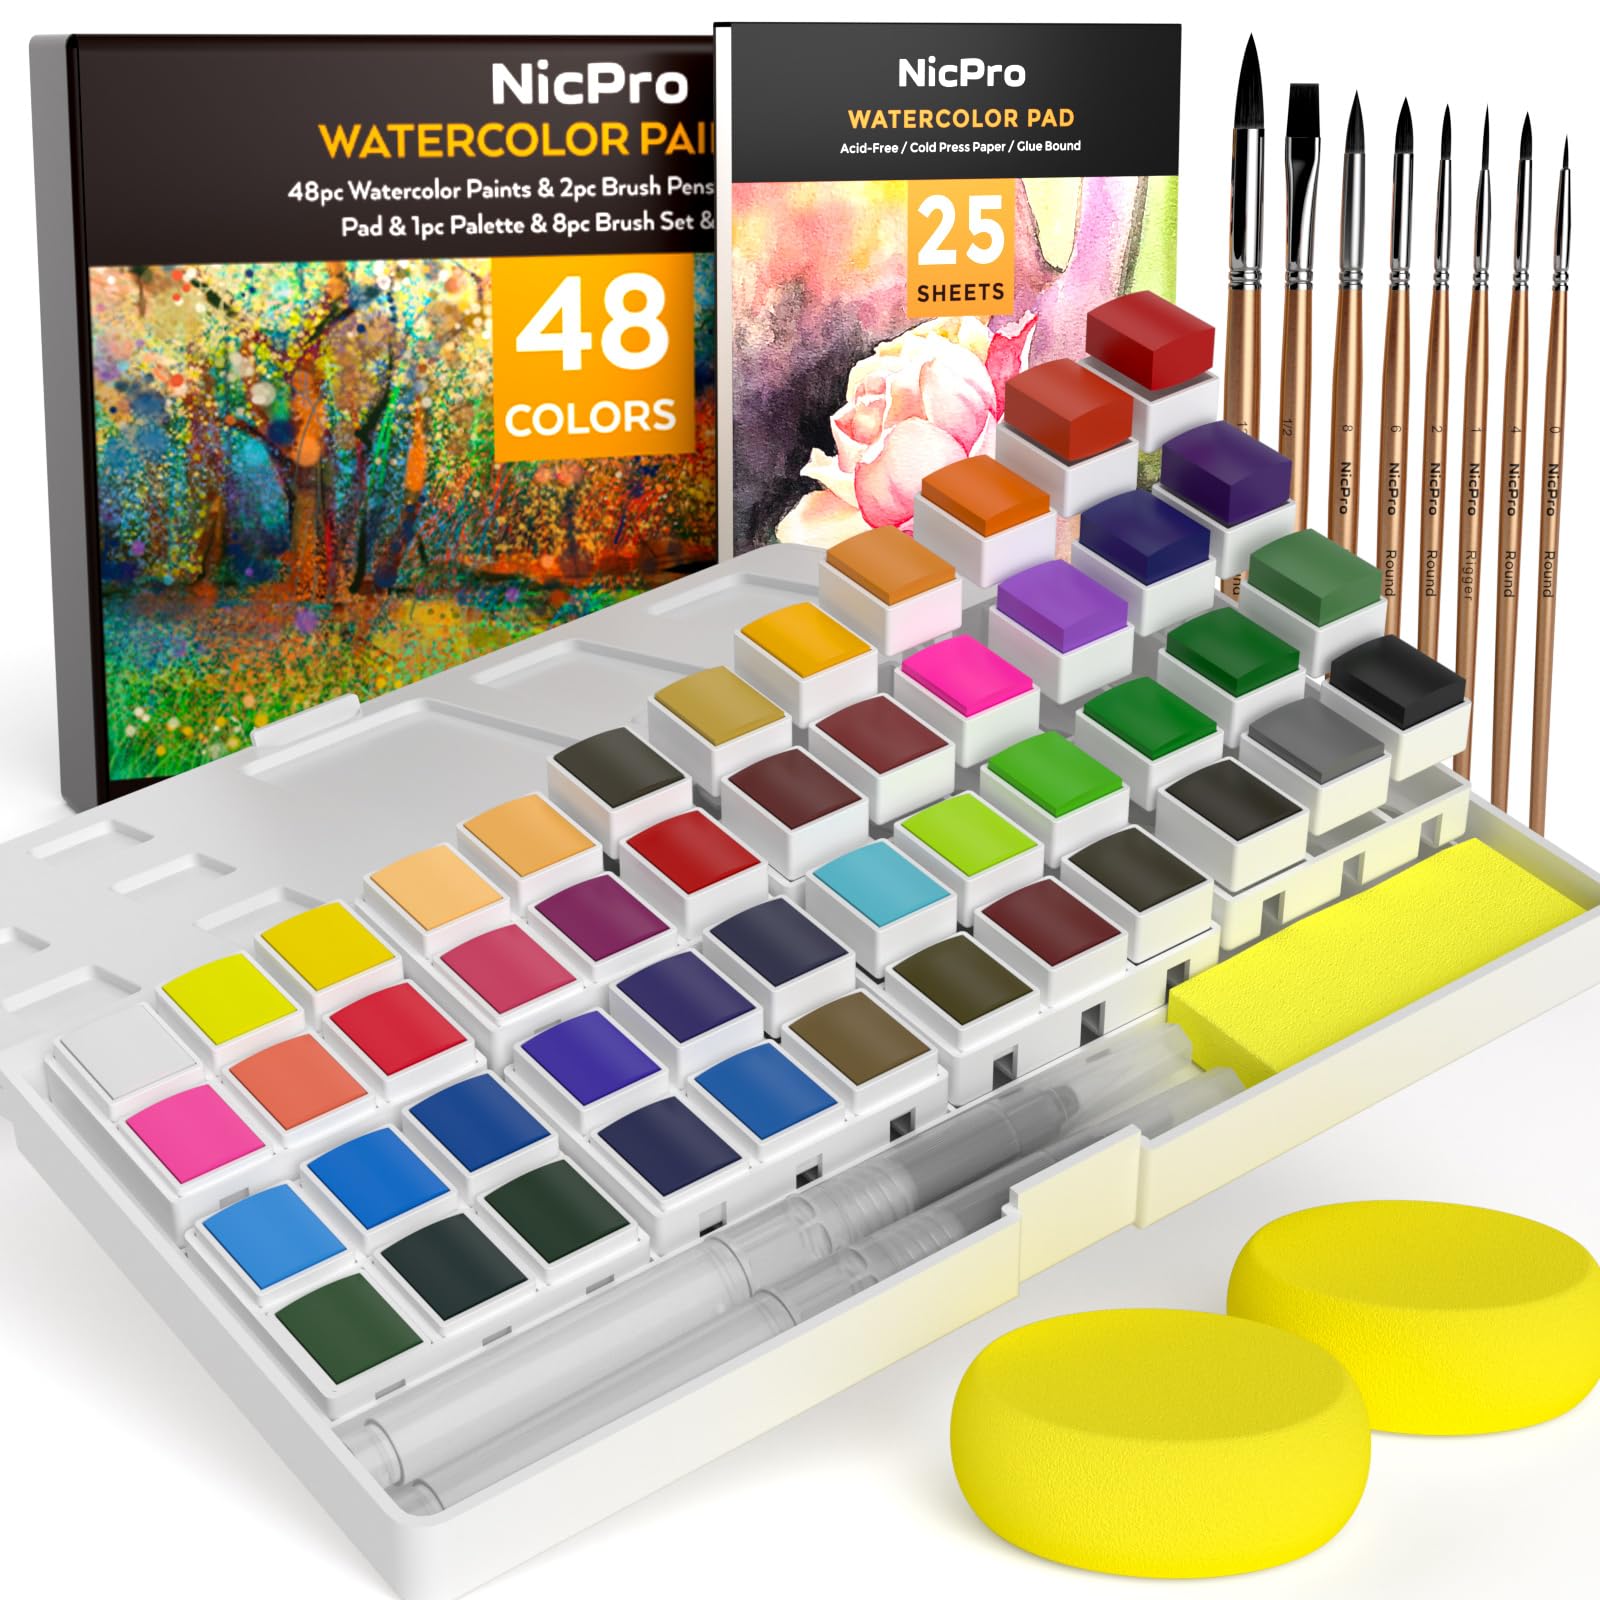  Nicpro Stay Wet Palette For Painting Miniature, Acrylic  Paint Palette Tray